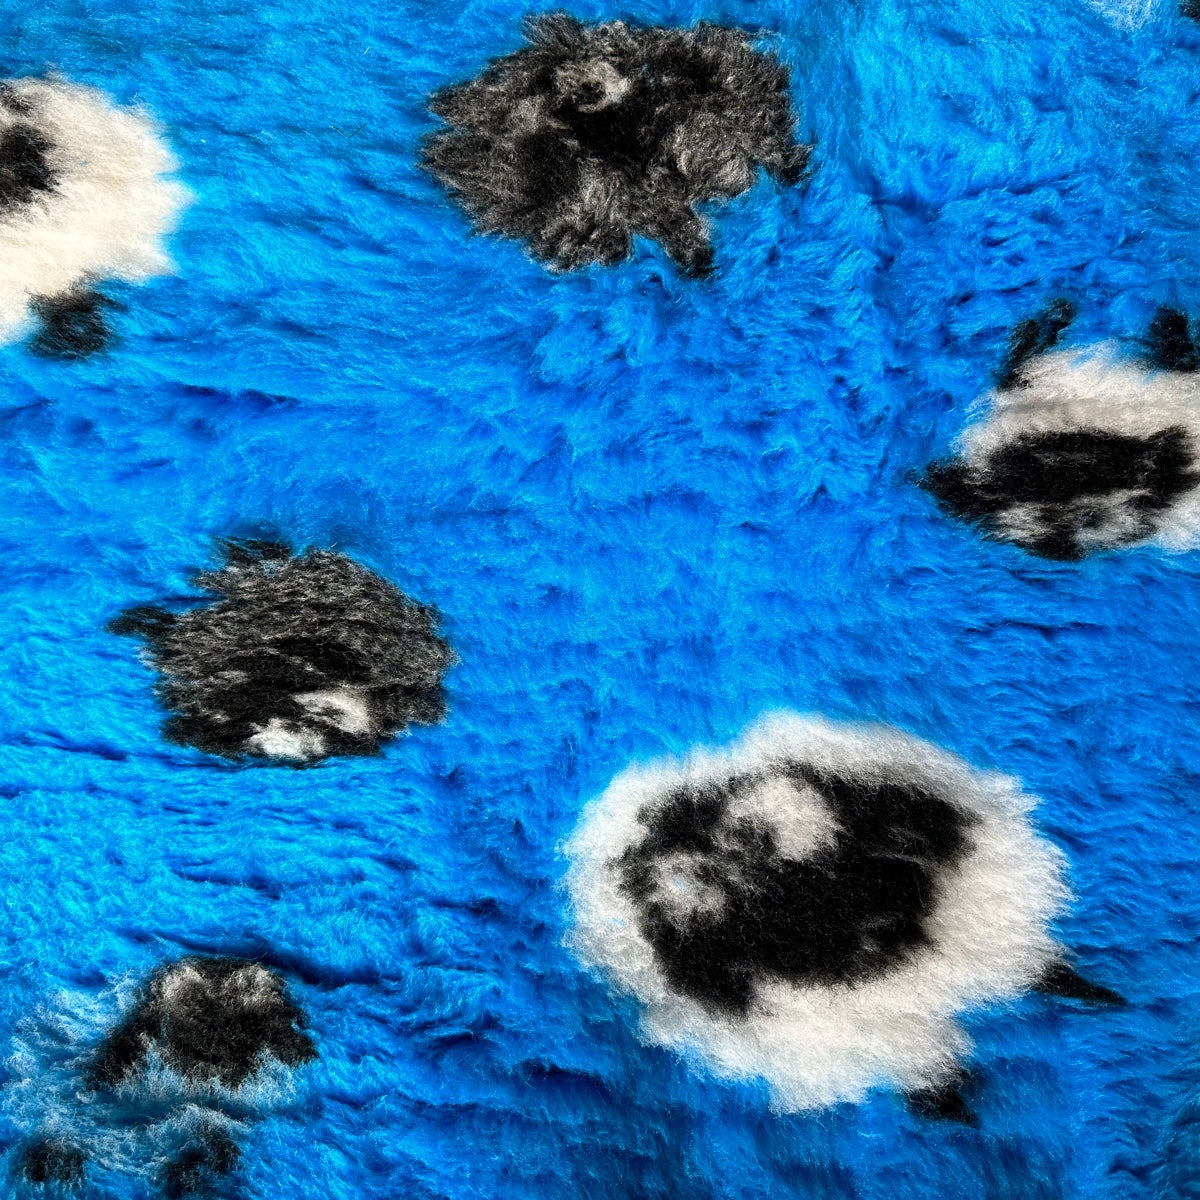 Dry Bed (Vet Bed) - Non Slip Blue with Sheep